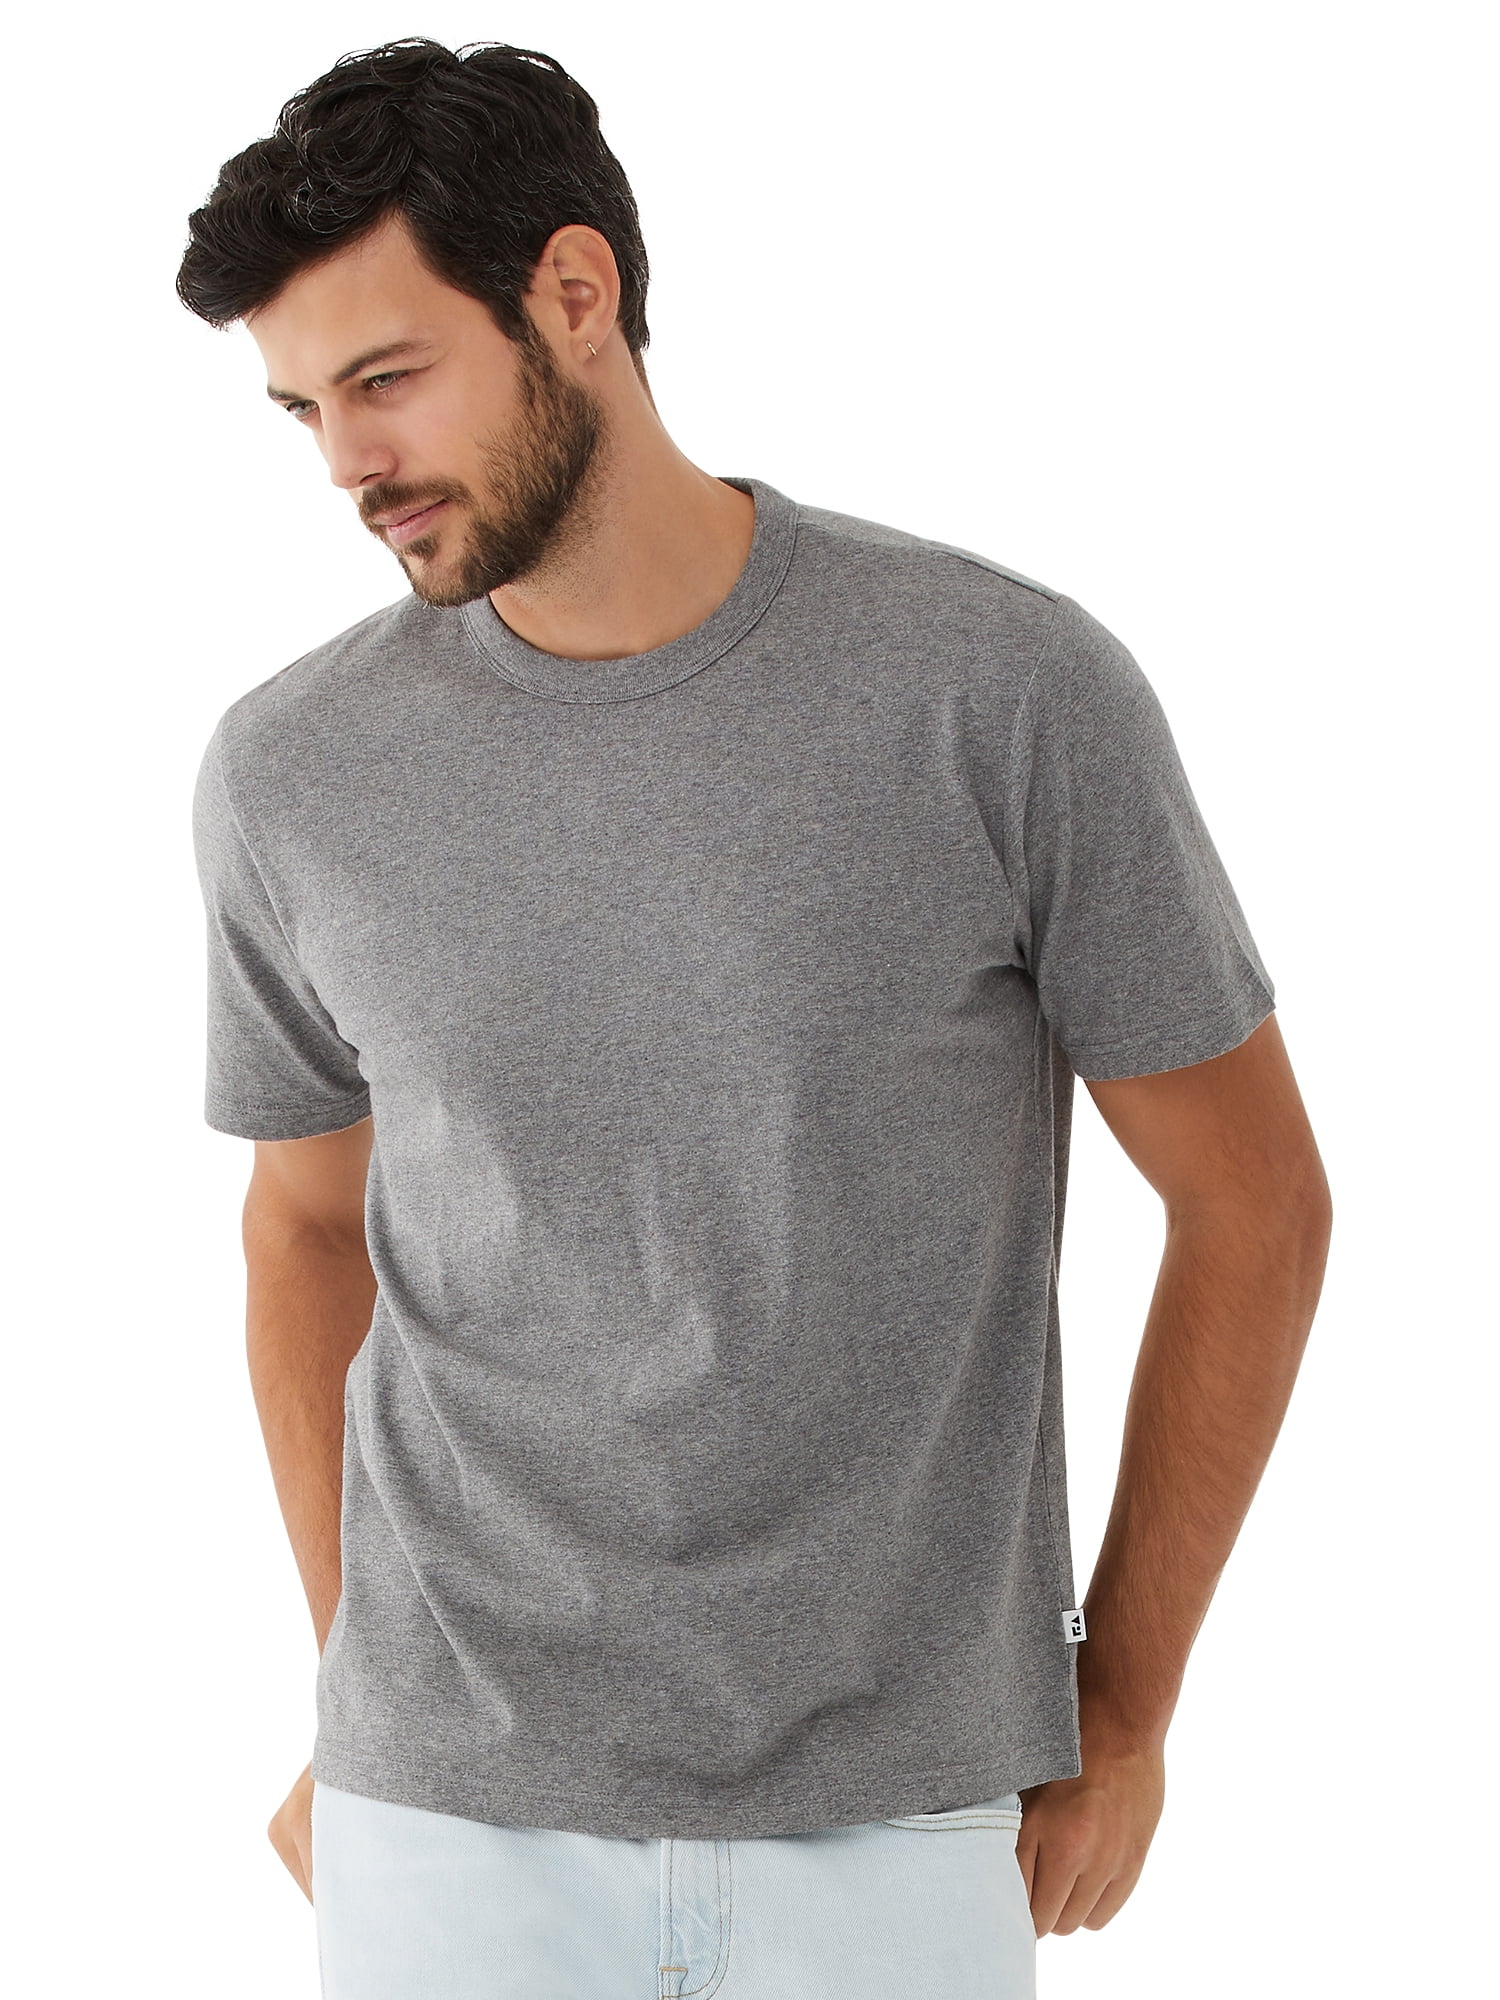 Men T-shirt - S, Free Delivery